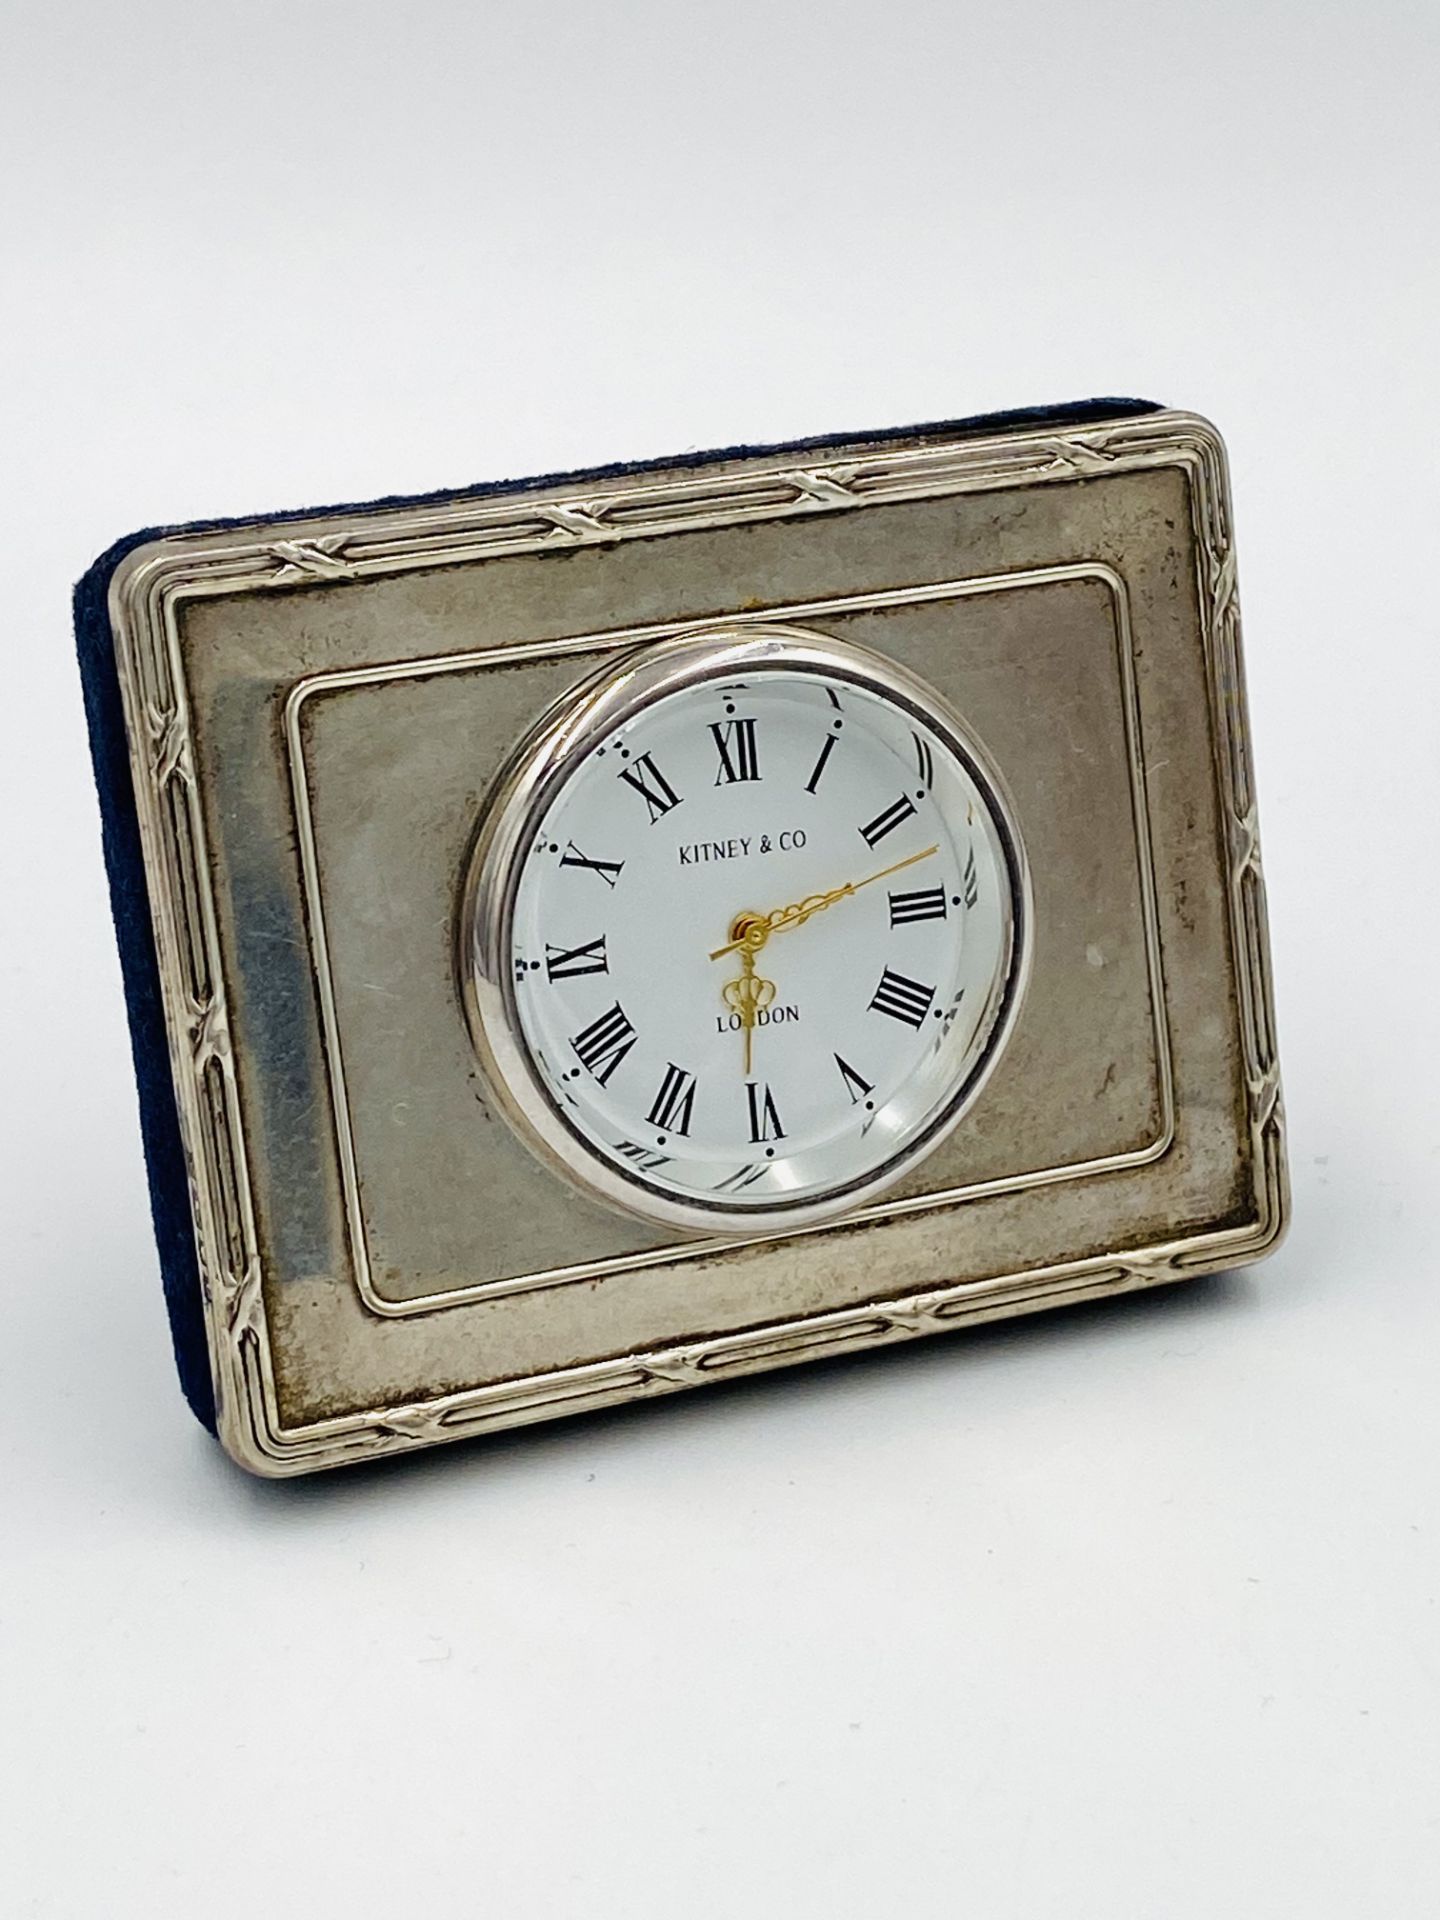 Kitney & Co clock with silver front